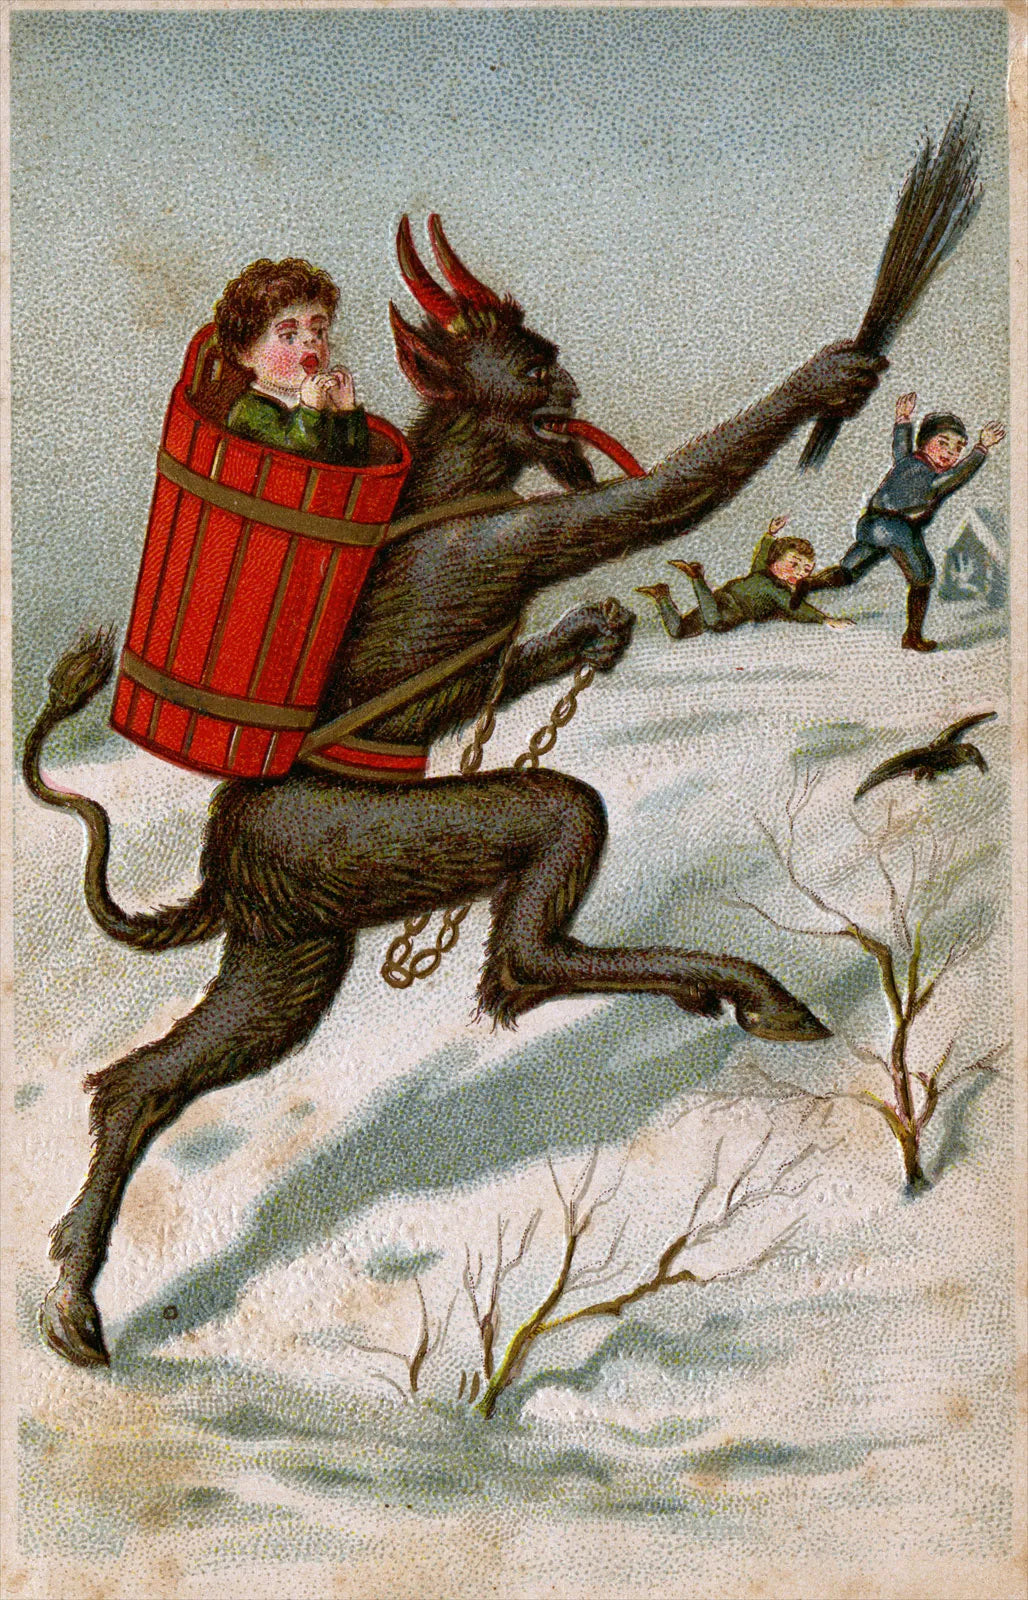 Who is the Krampus?